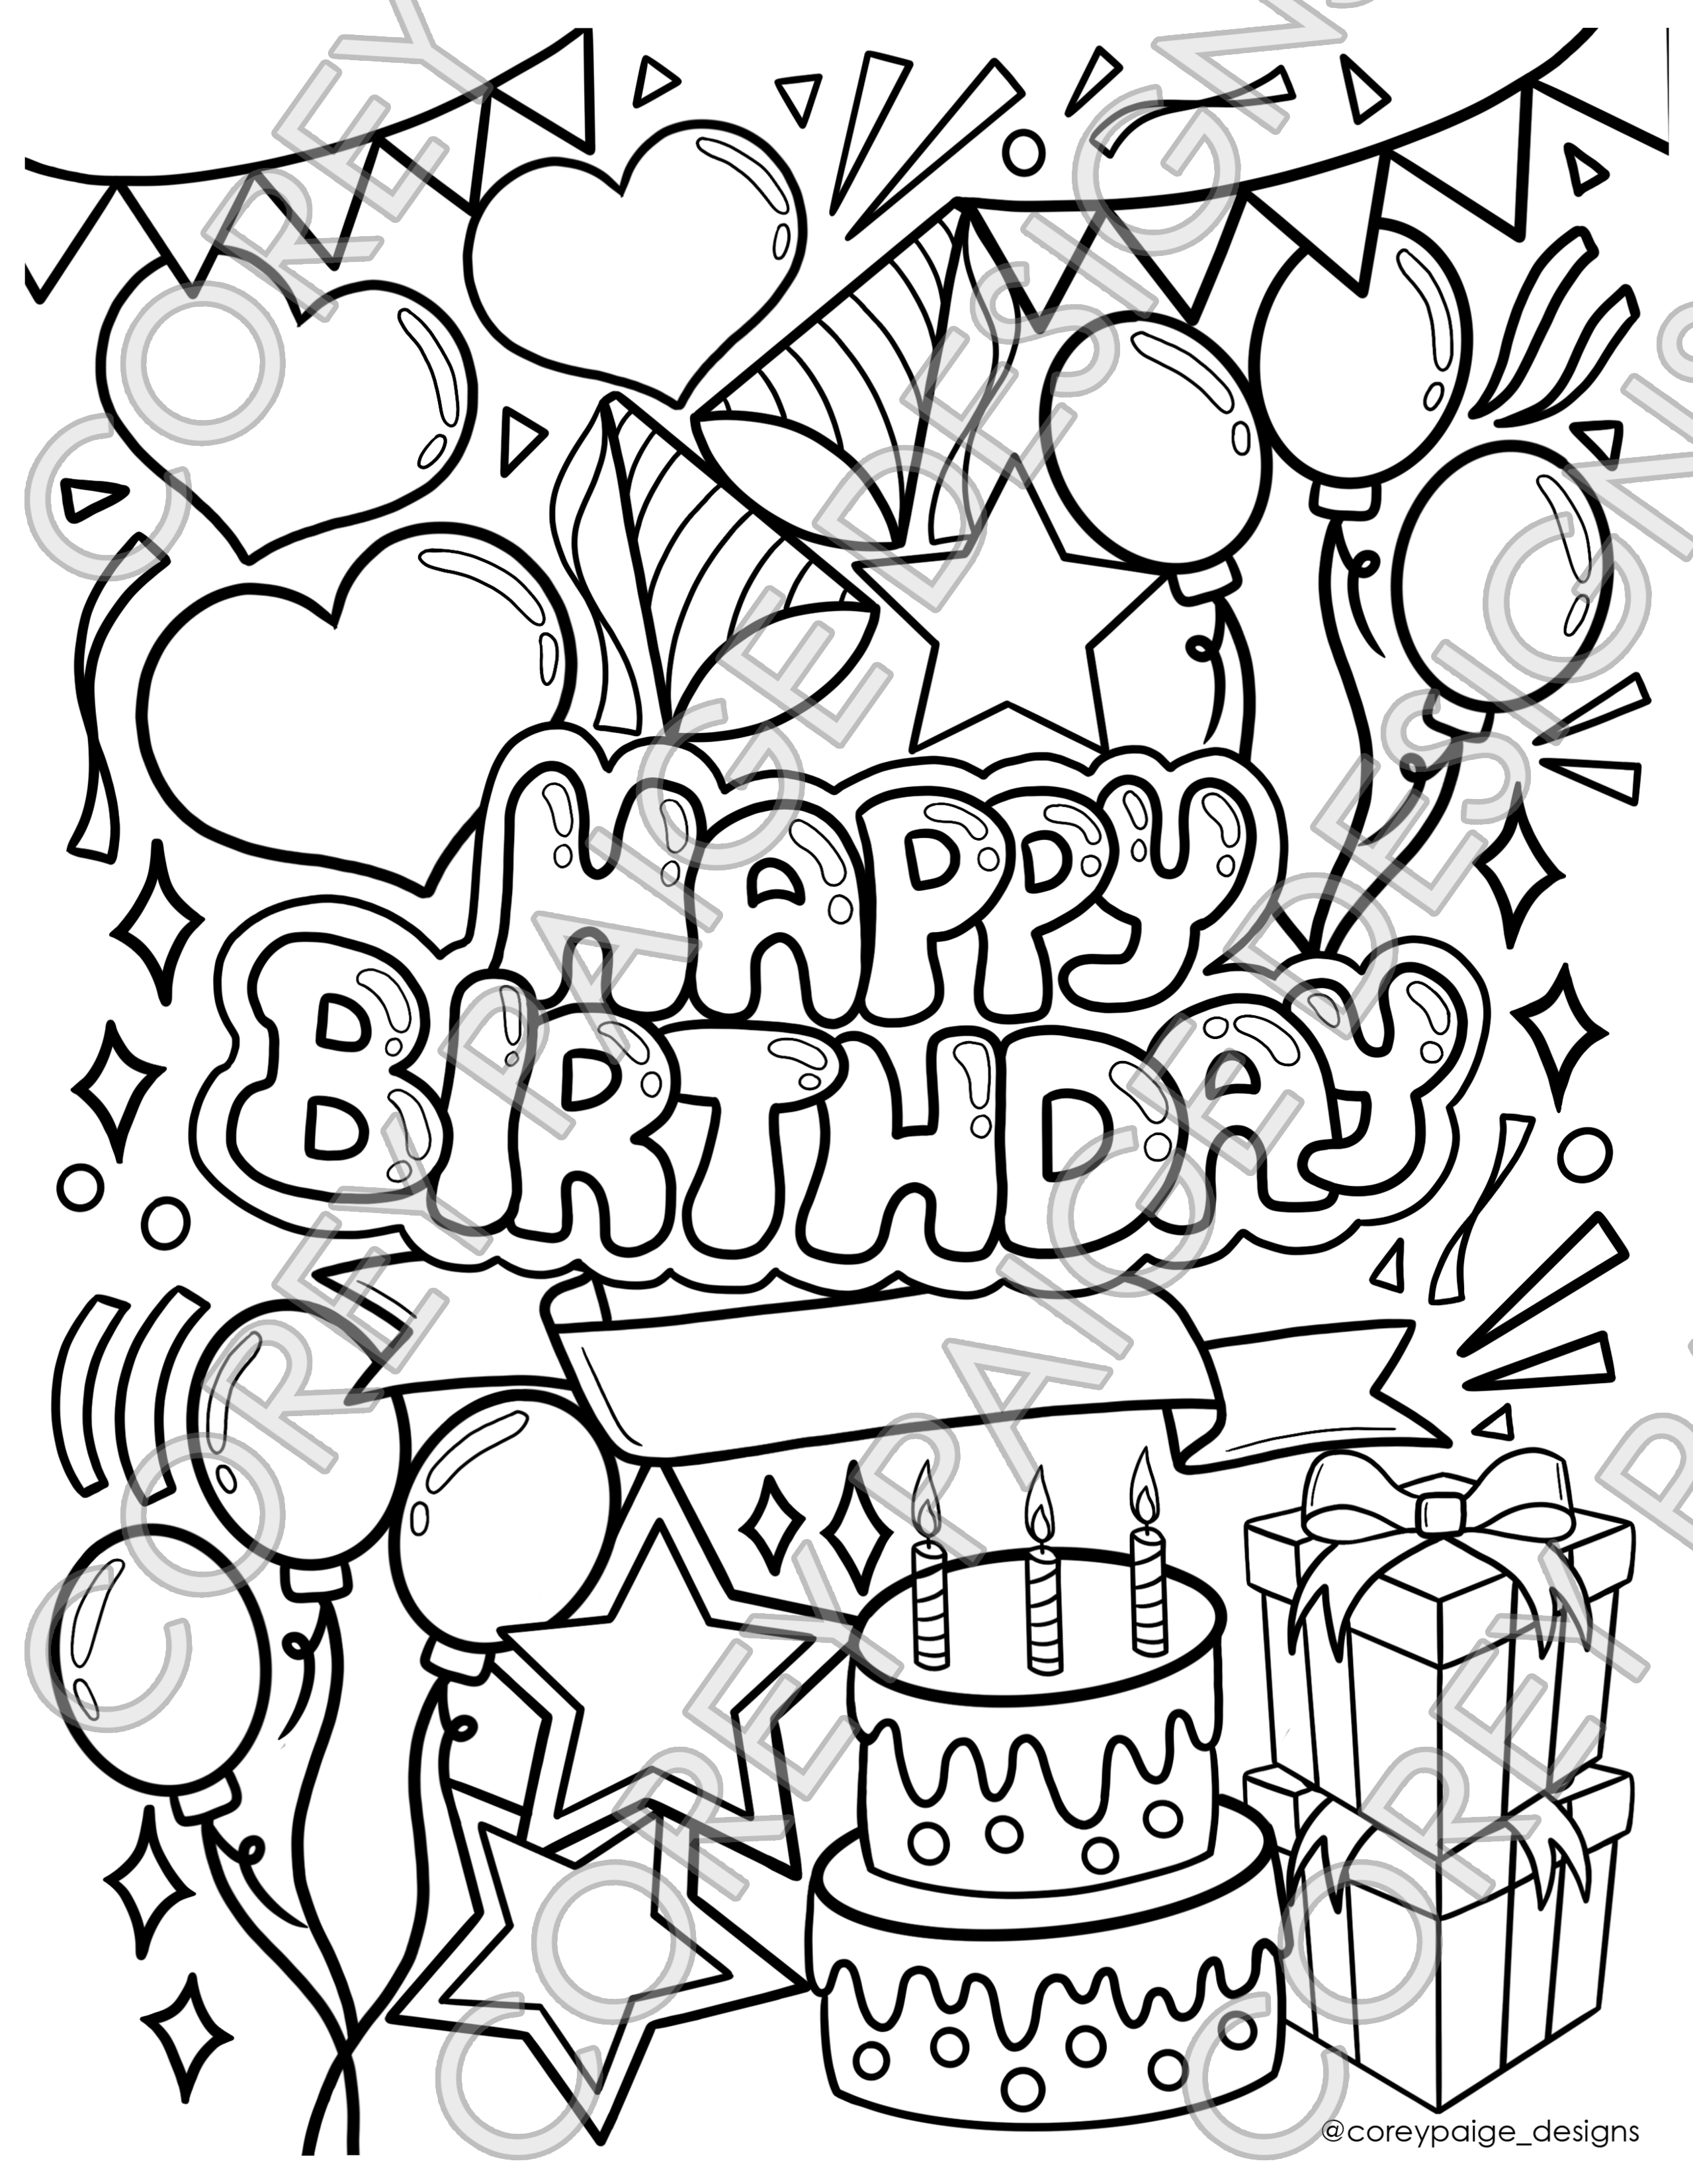 happy-birthday-coloring-pages-printable